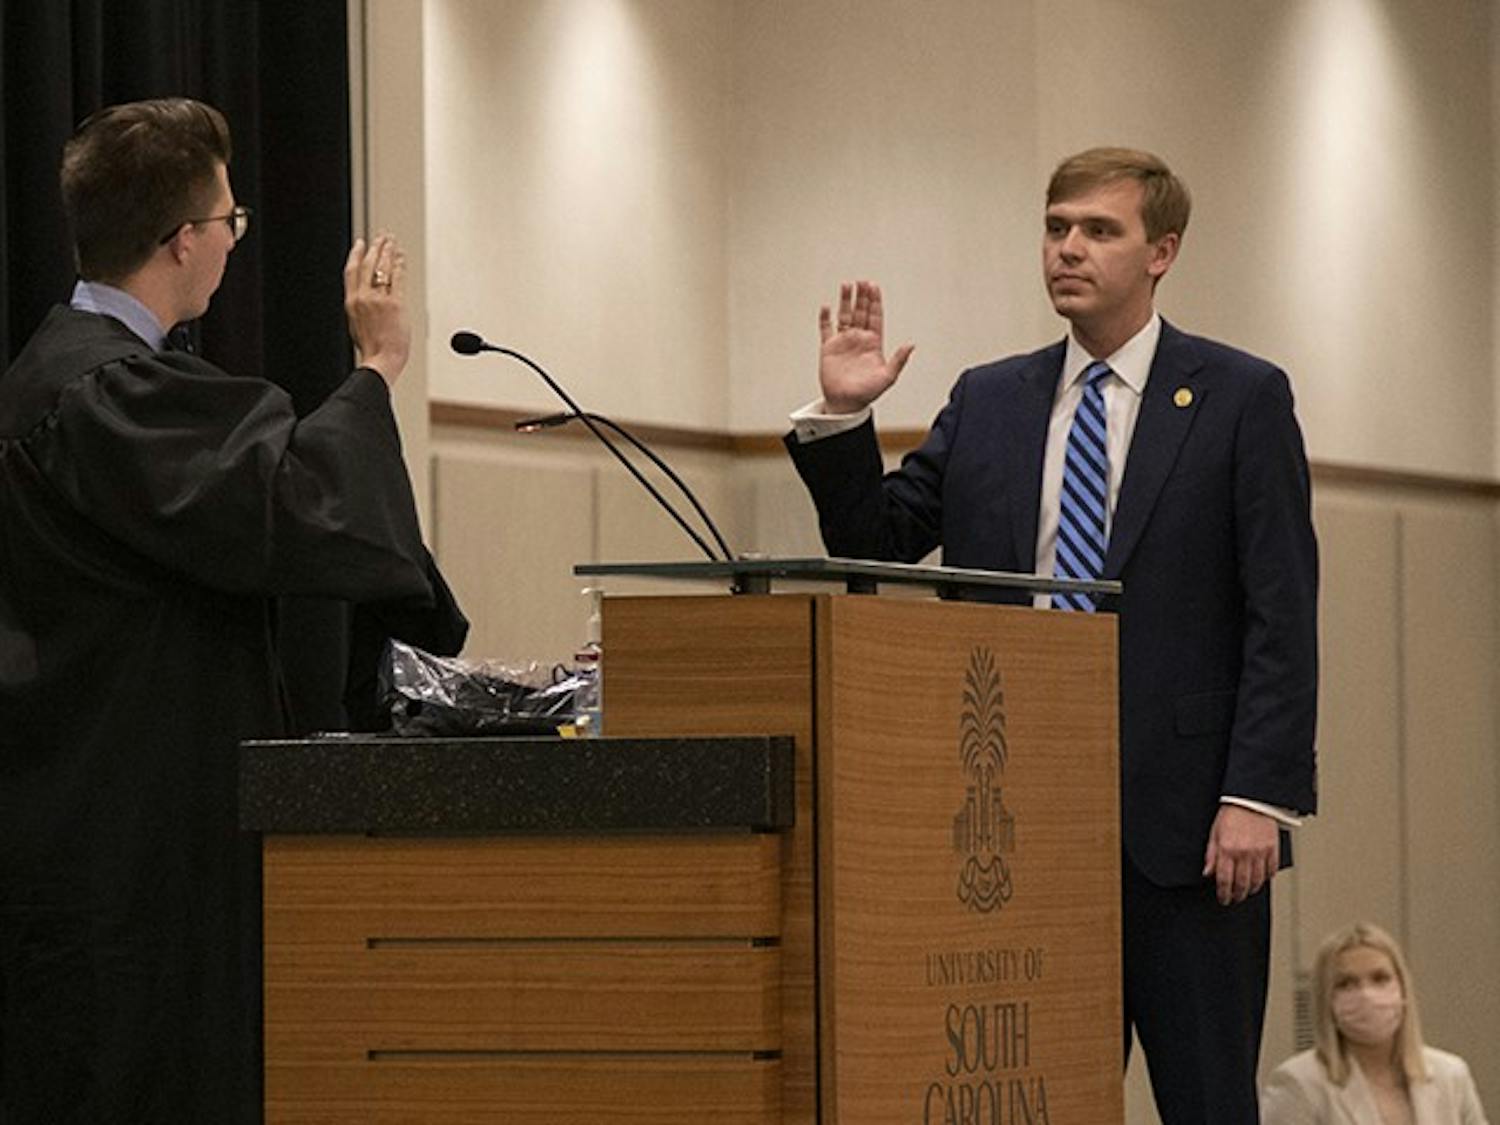 New Student Body President Alex Harrell being sworn into his position. This was immediately followed with his inauguration speech, where he thanks those who played a part in his success.